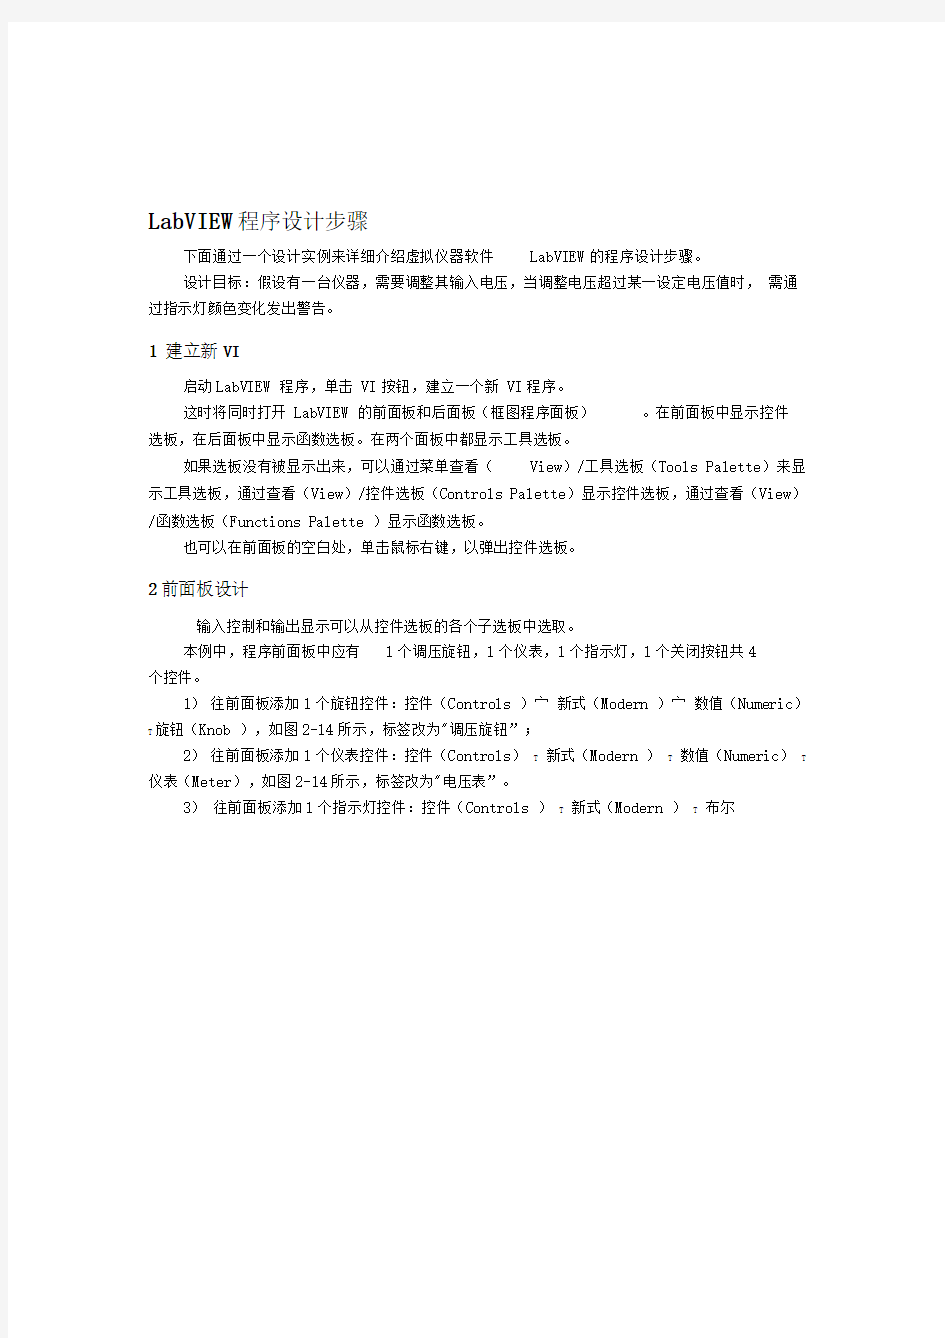 LabVIEW程序设计步骤